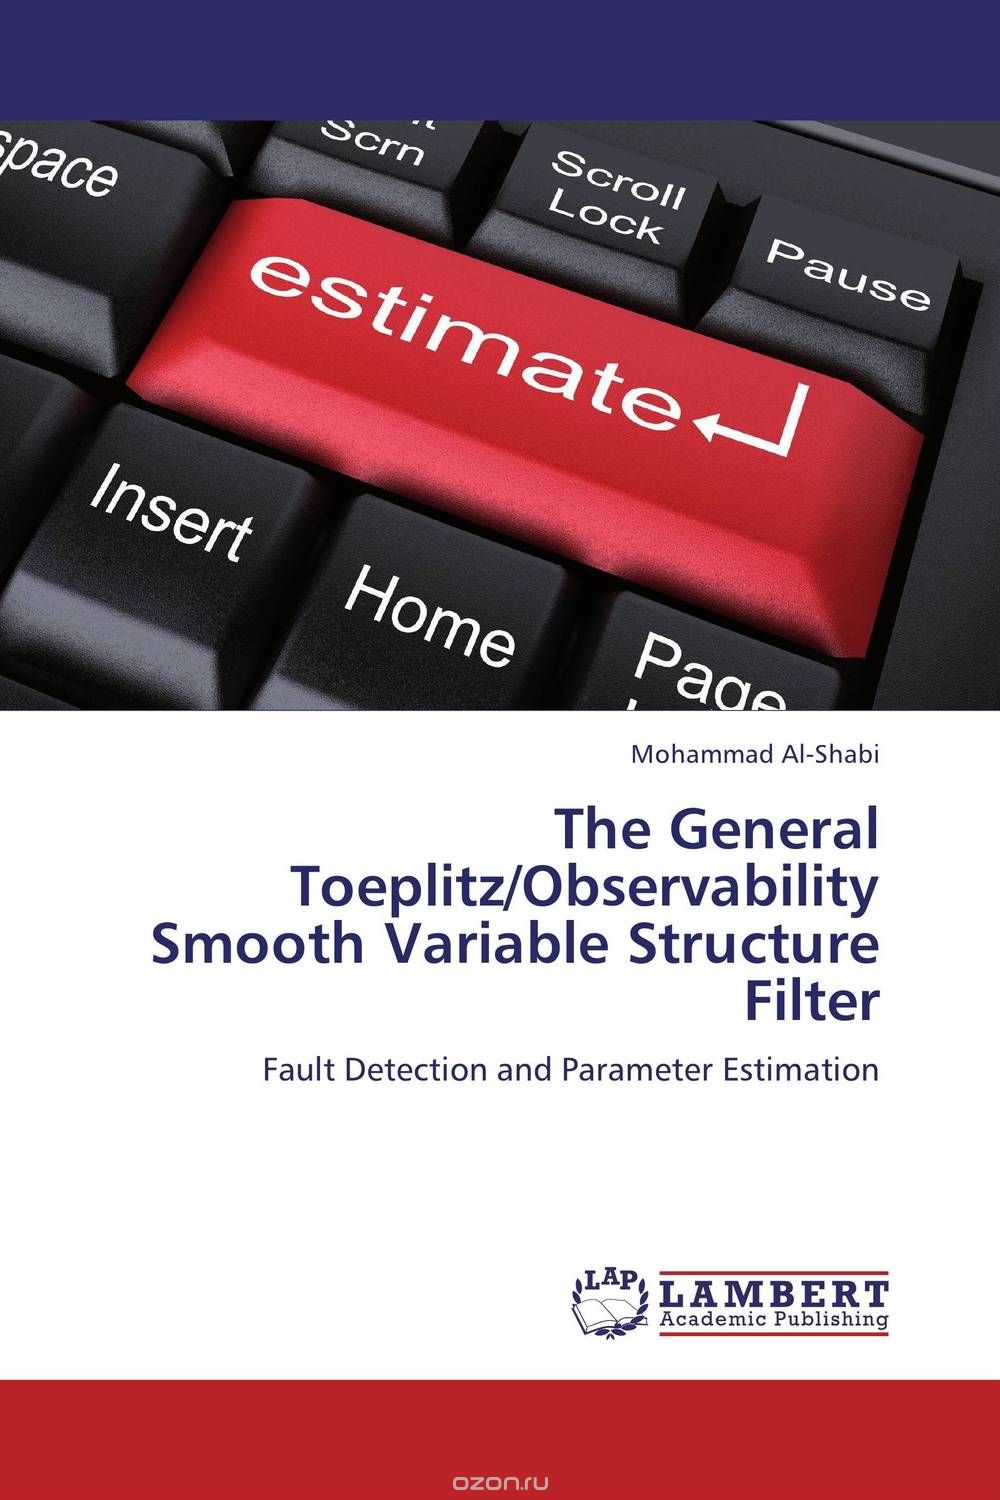 The General Toeplitz/Observability Smooth Variable Structure Filter